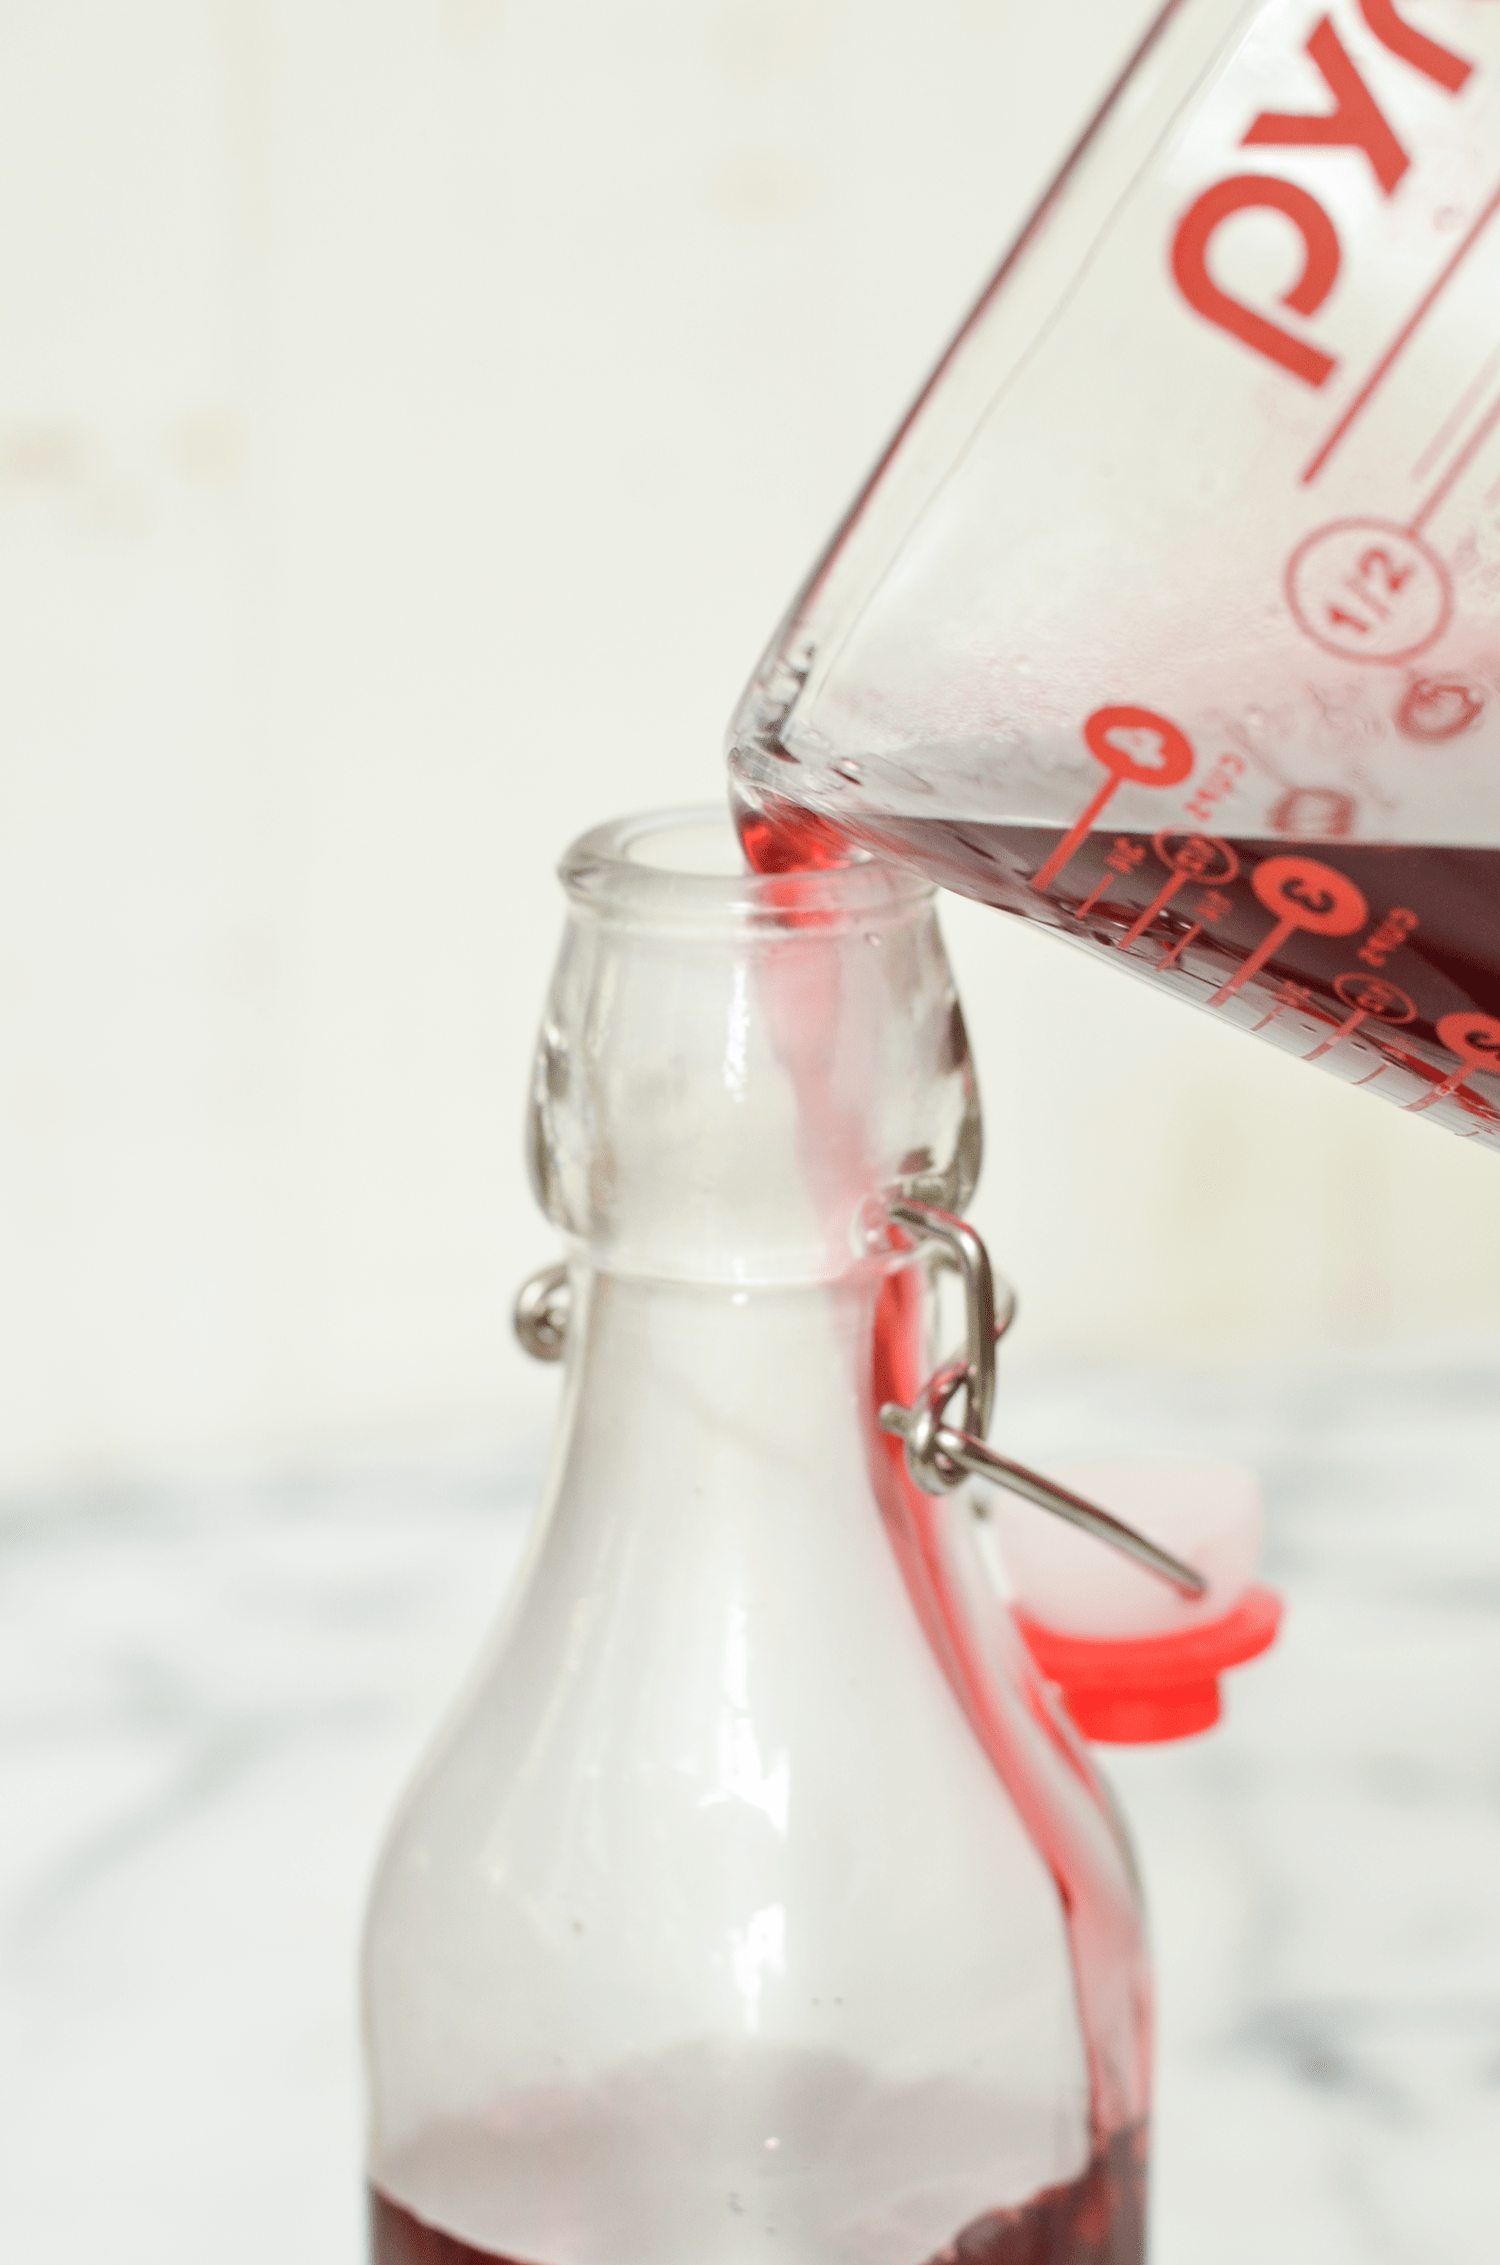 Make Your Own Flavored Simple Syrups - Four Ways! (Click through for recipe)